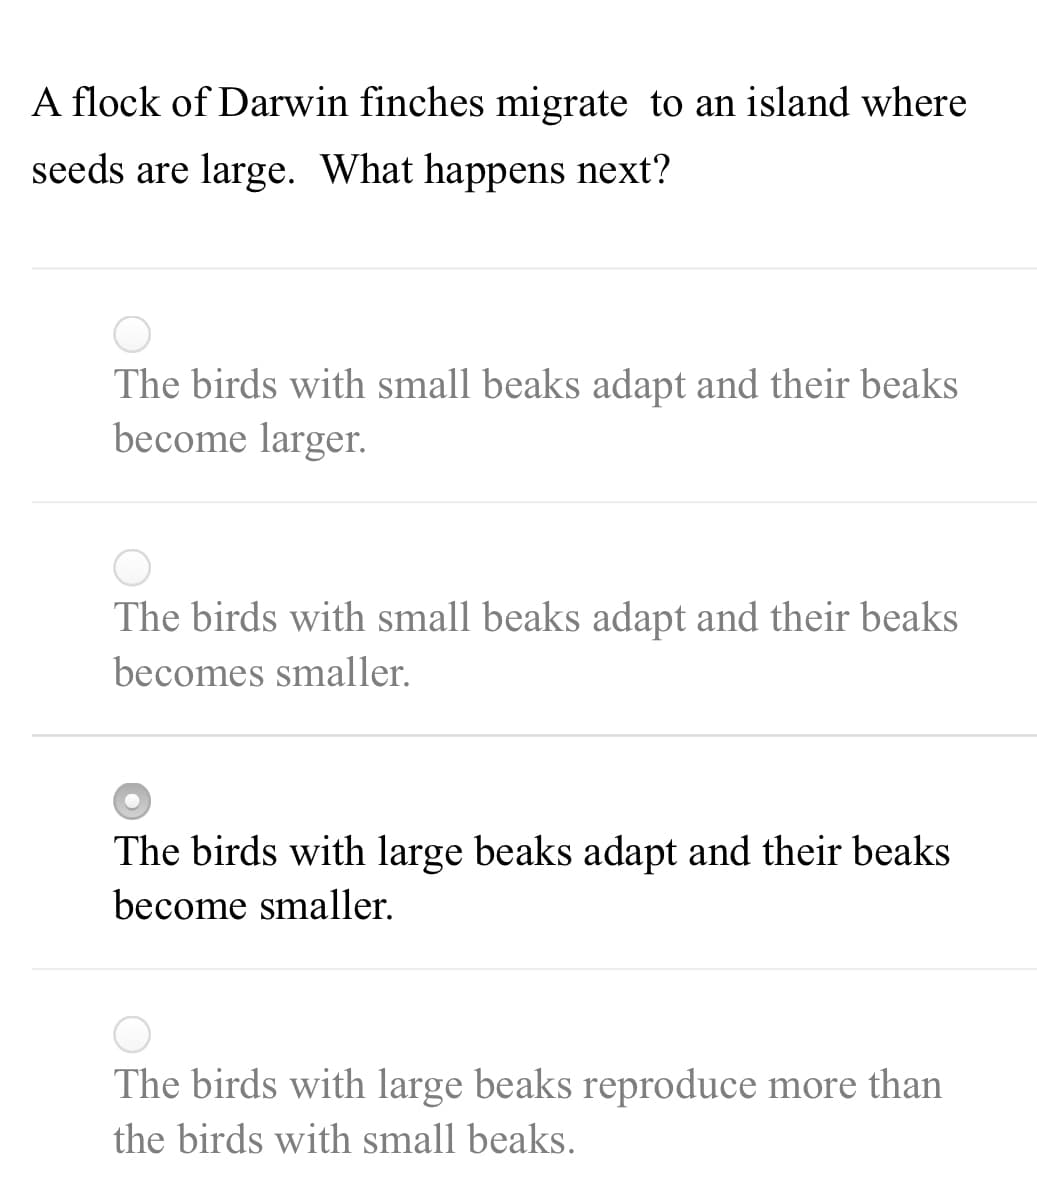 A flock of Darwin finches migrate to an island where
seeds are large. What happens next?
The birds with small beaks adapt and their beaks
become larger.
The birds with small beaks adapt and their beaks
becomes smaller.
The birds with large beaks adapt and their beaks
become smaller.
The birds with large beaks reproduce more than
the birds with small beaks.
